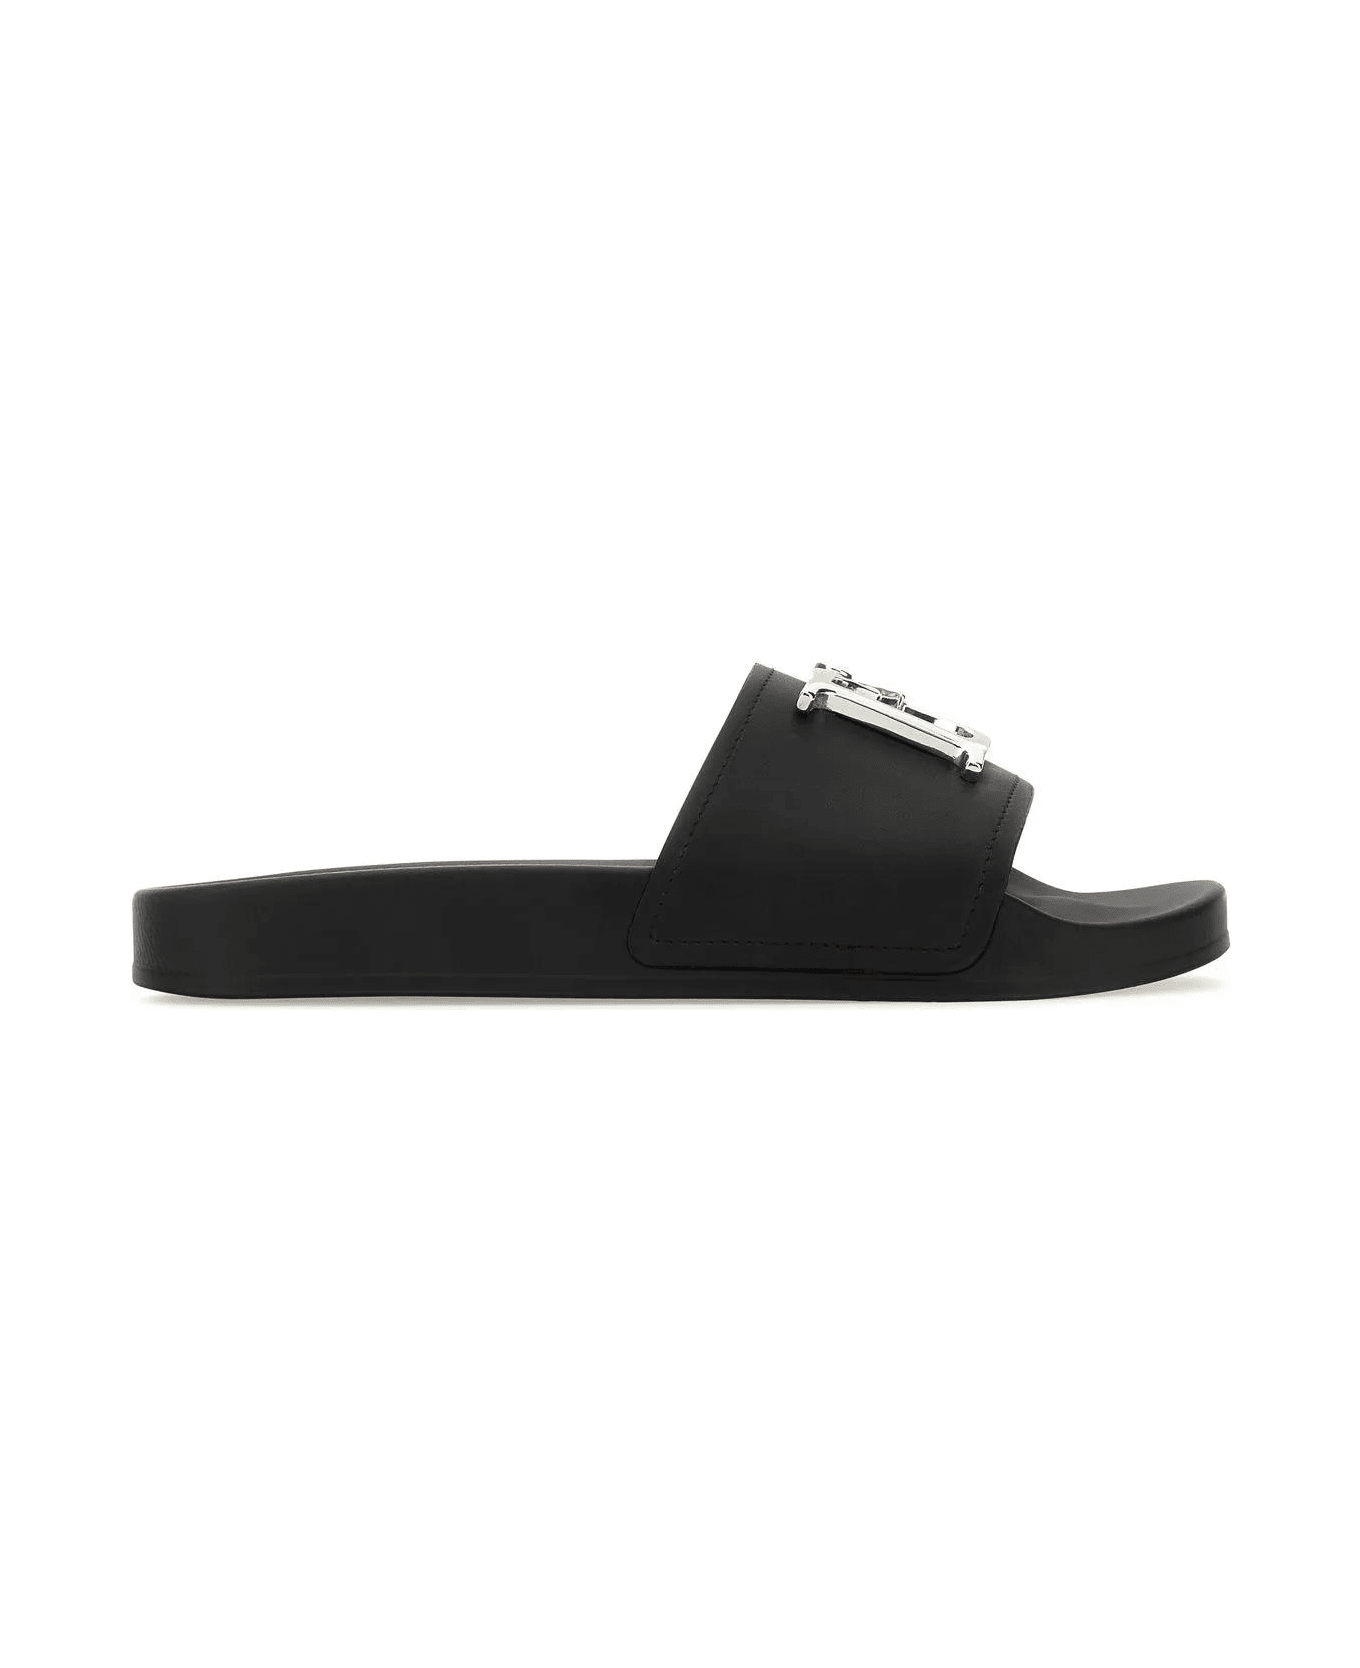 Dsquared2 Black Leather D2 Statement Slippers - Nero